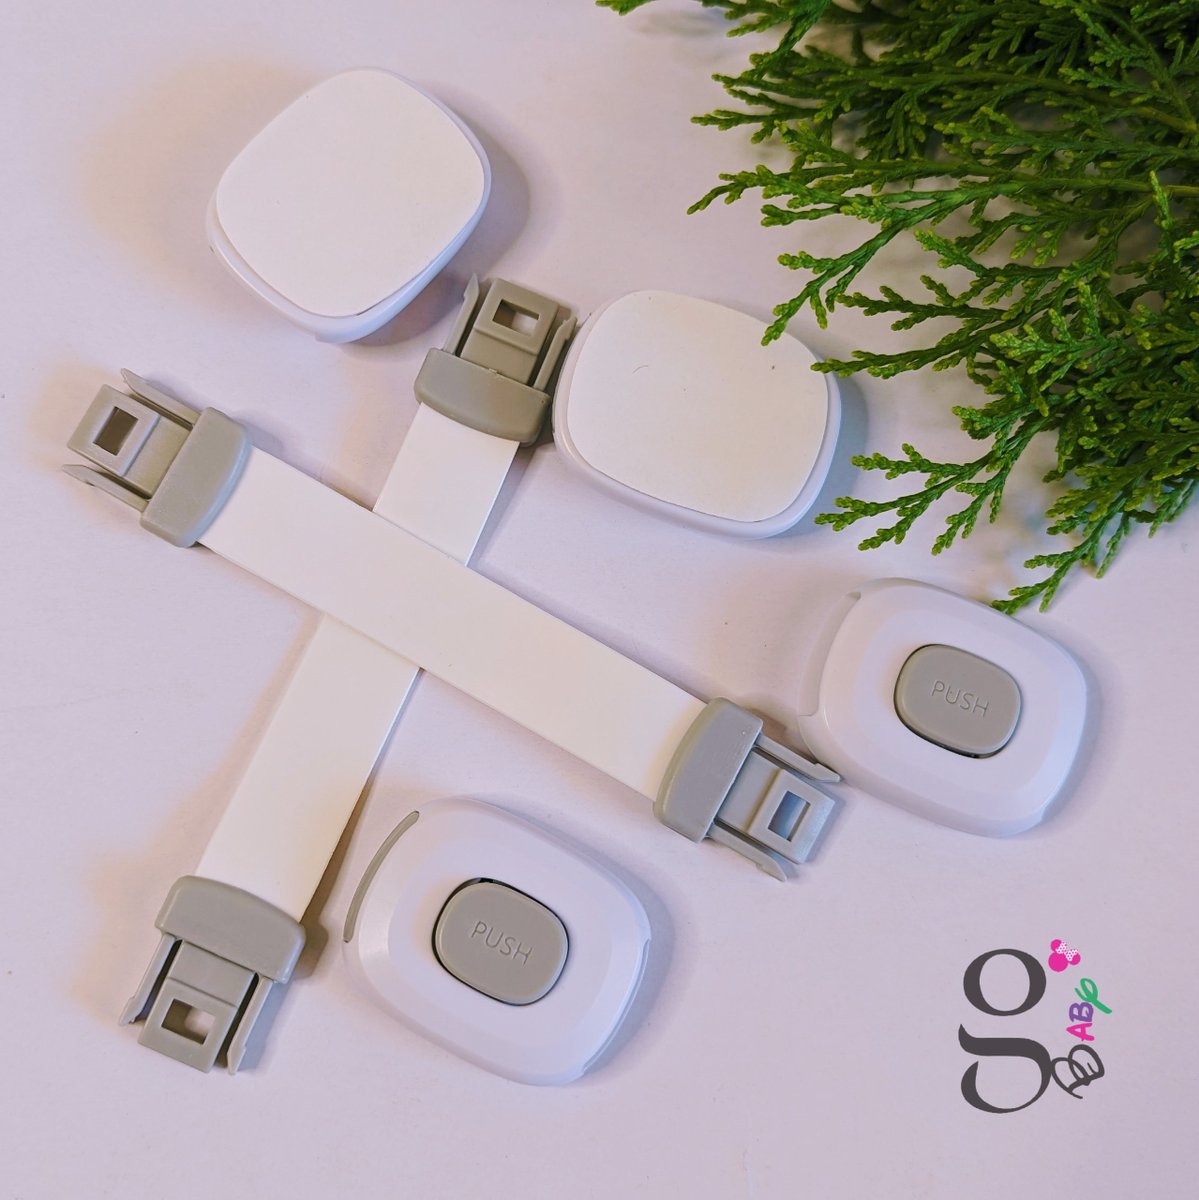 Thanks to the adhesive and strong industrial grade tape they have on both sides, you can install and remove them easily. UGX: 10.000 (a pair)

#safetylocks #safety #locks #motherandbaby #babyproducts #baby #babygirl #babyboy #babyshower #newborn #babyshop #mom #trending #viral